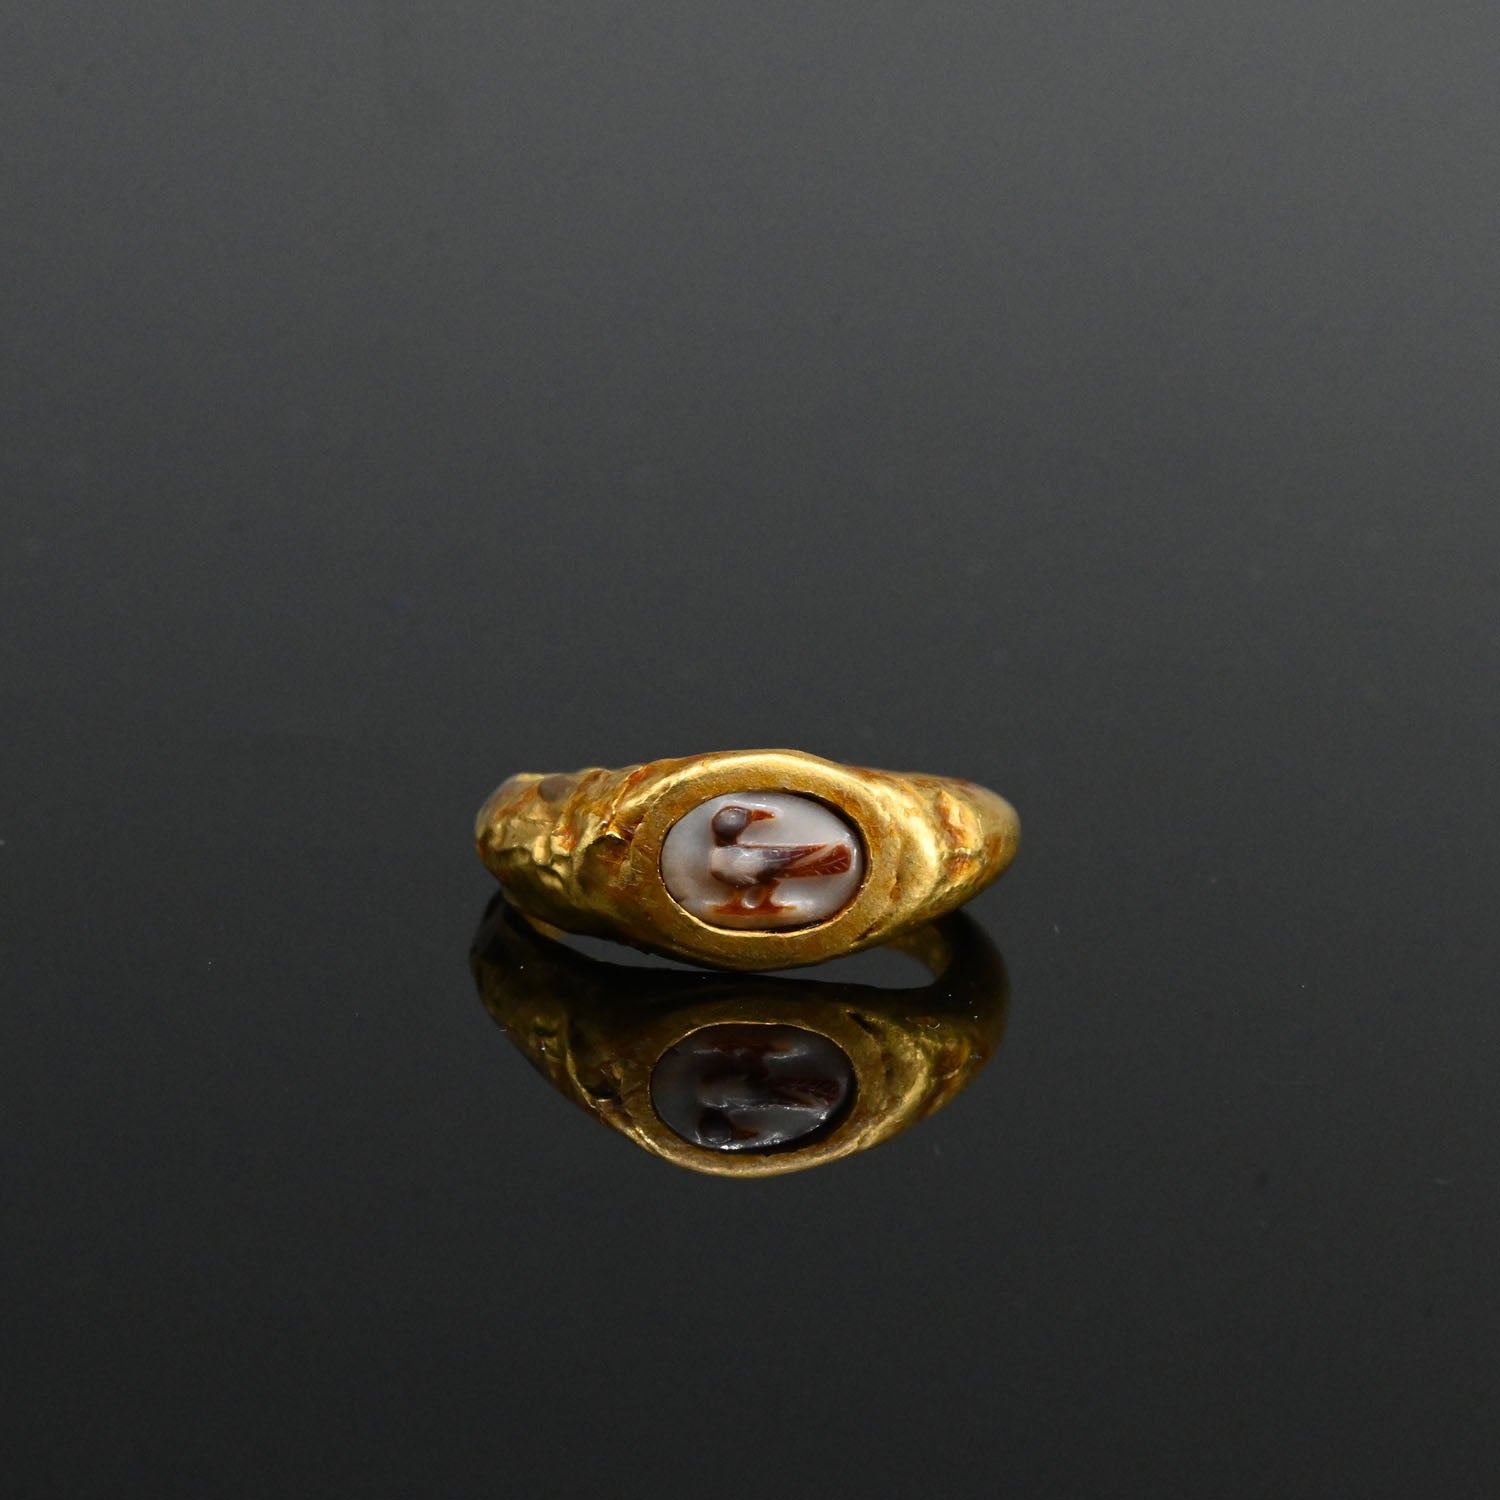 A fine Roman Gold and Sardonyx Cameo Finger Ring, Roman Imperial Period, ca. 1st century CE